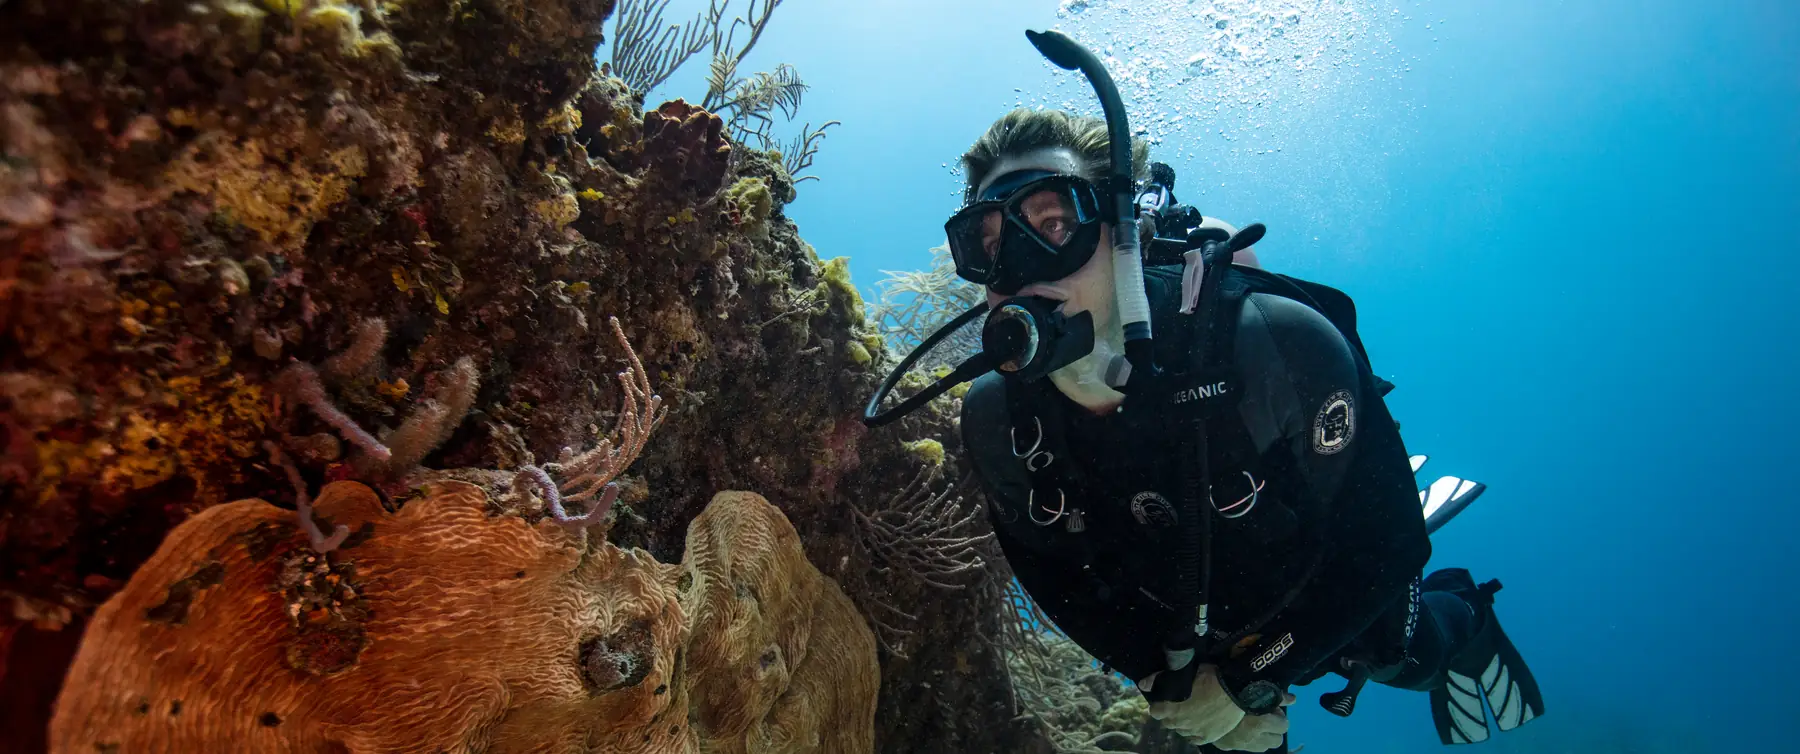 A male scuba diver swims in clear water past an outcrop of various corals and sponges